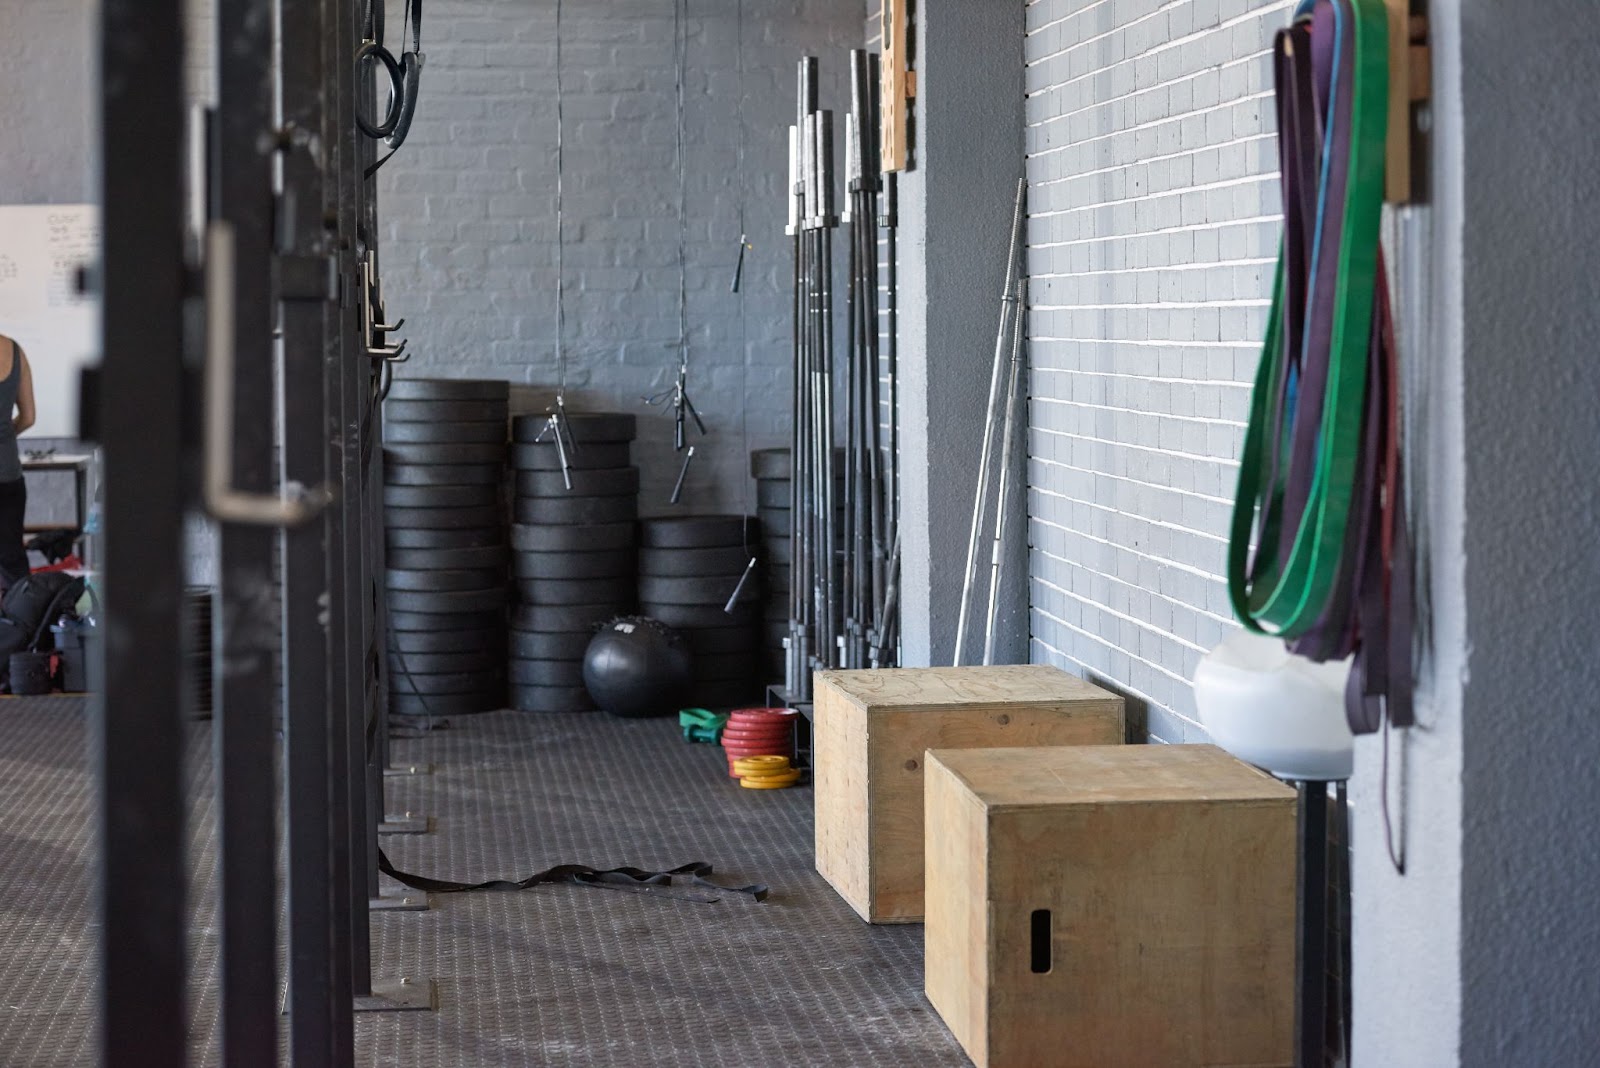 Crossfit-style gym with several pieces of fitness equipment inside